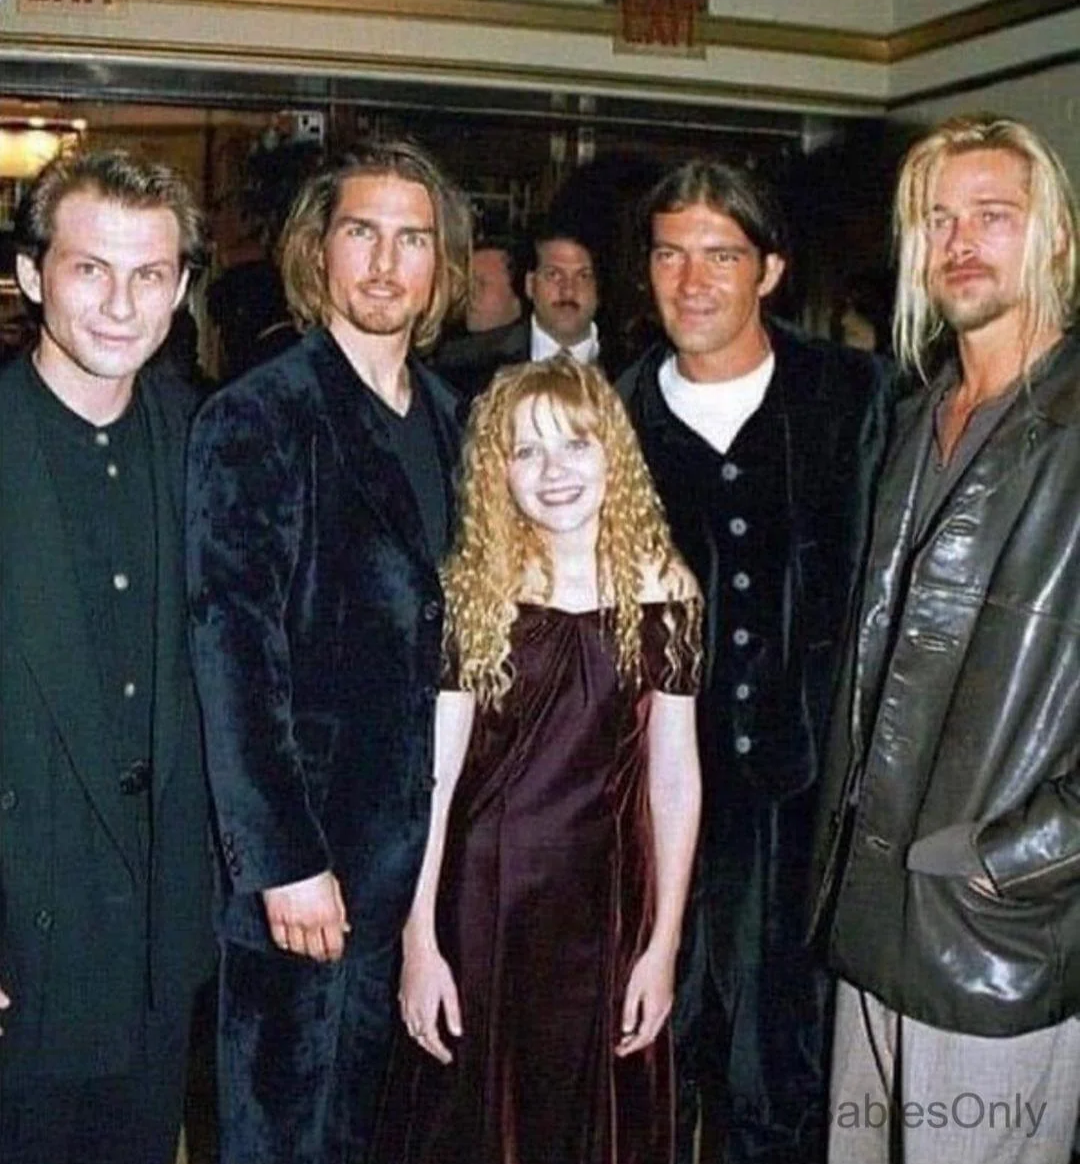 A young and unknown Taylor Swift meets the band Nickelback.